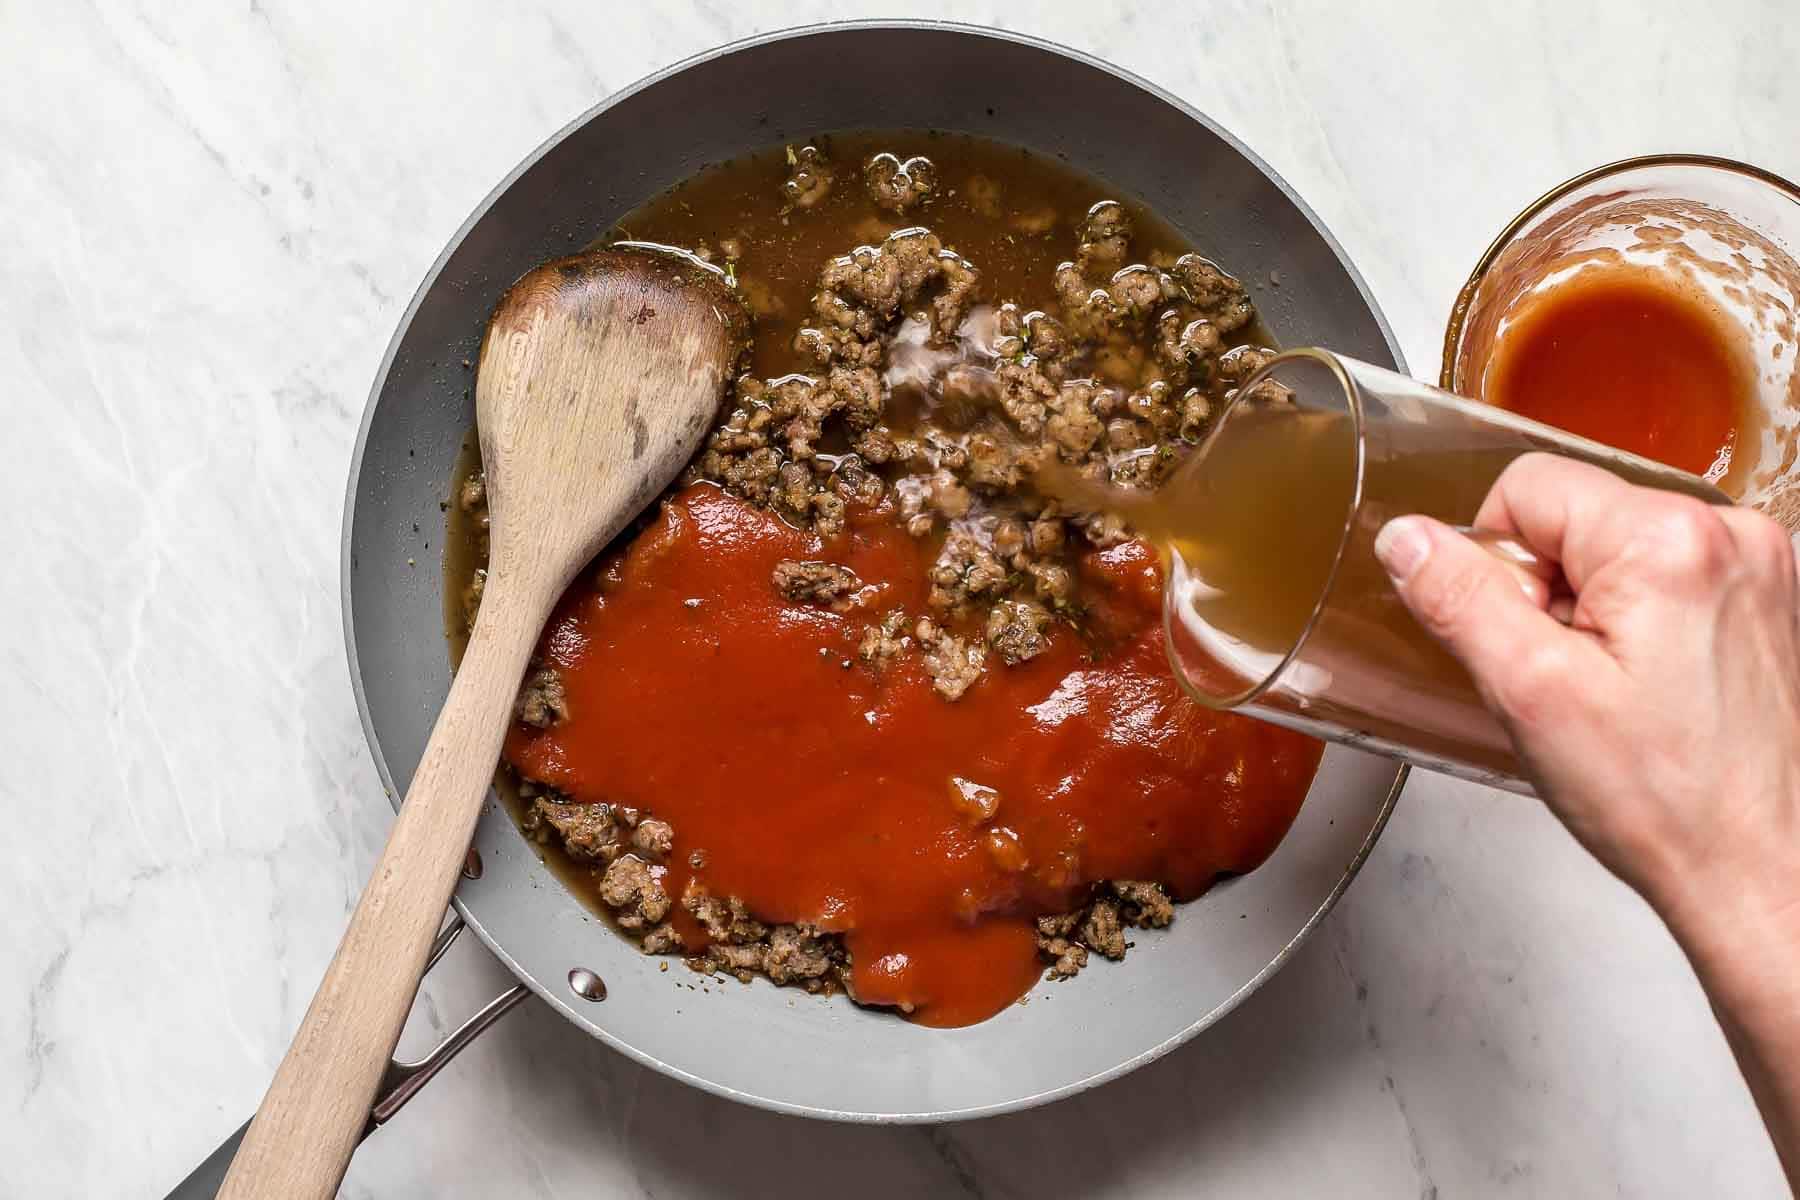 Tomato sauce pouring into skillet with ground sausage.